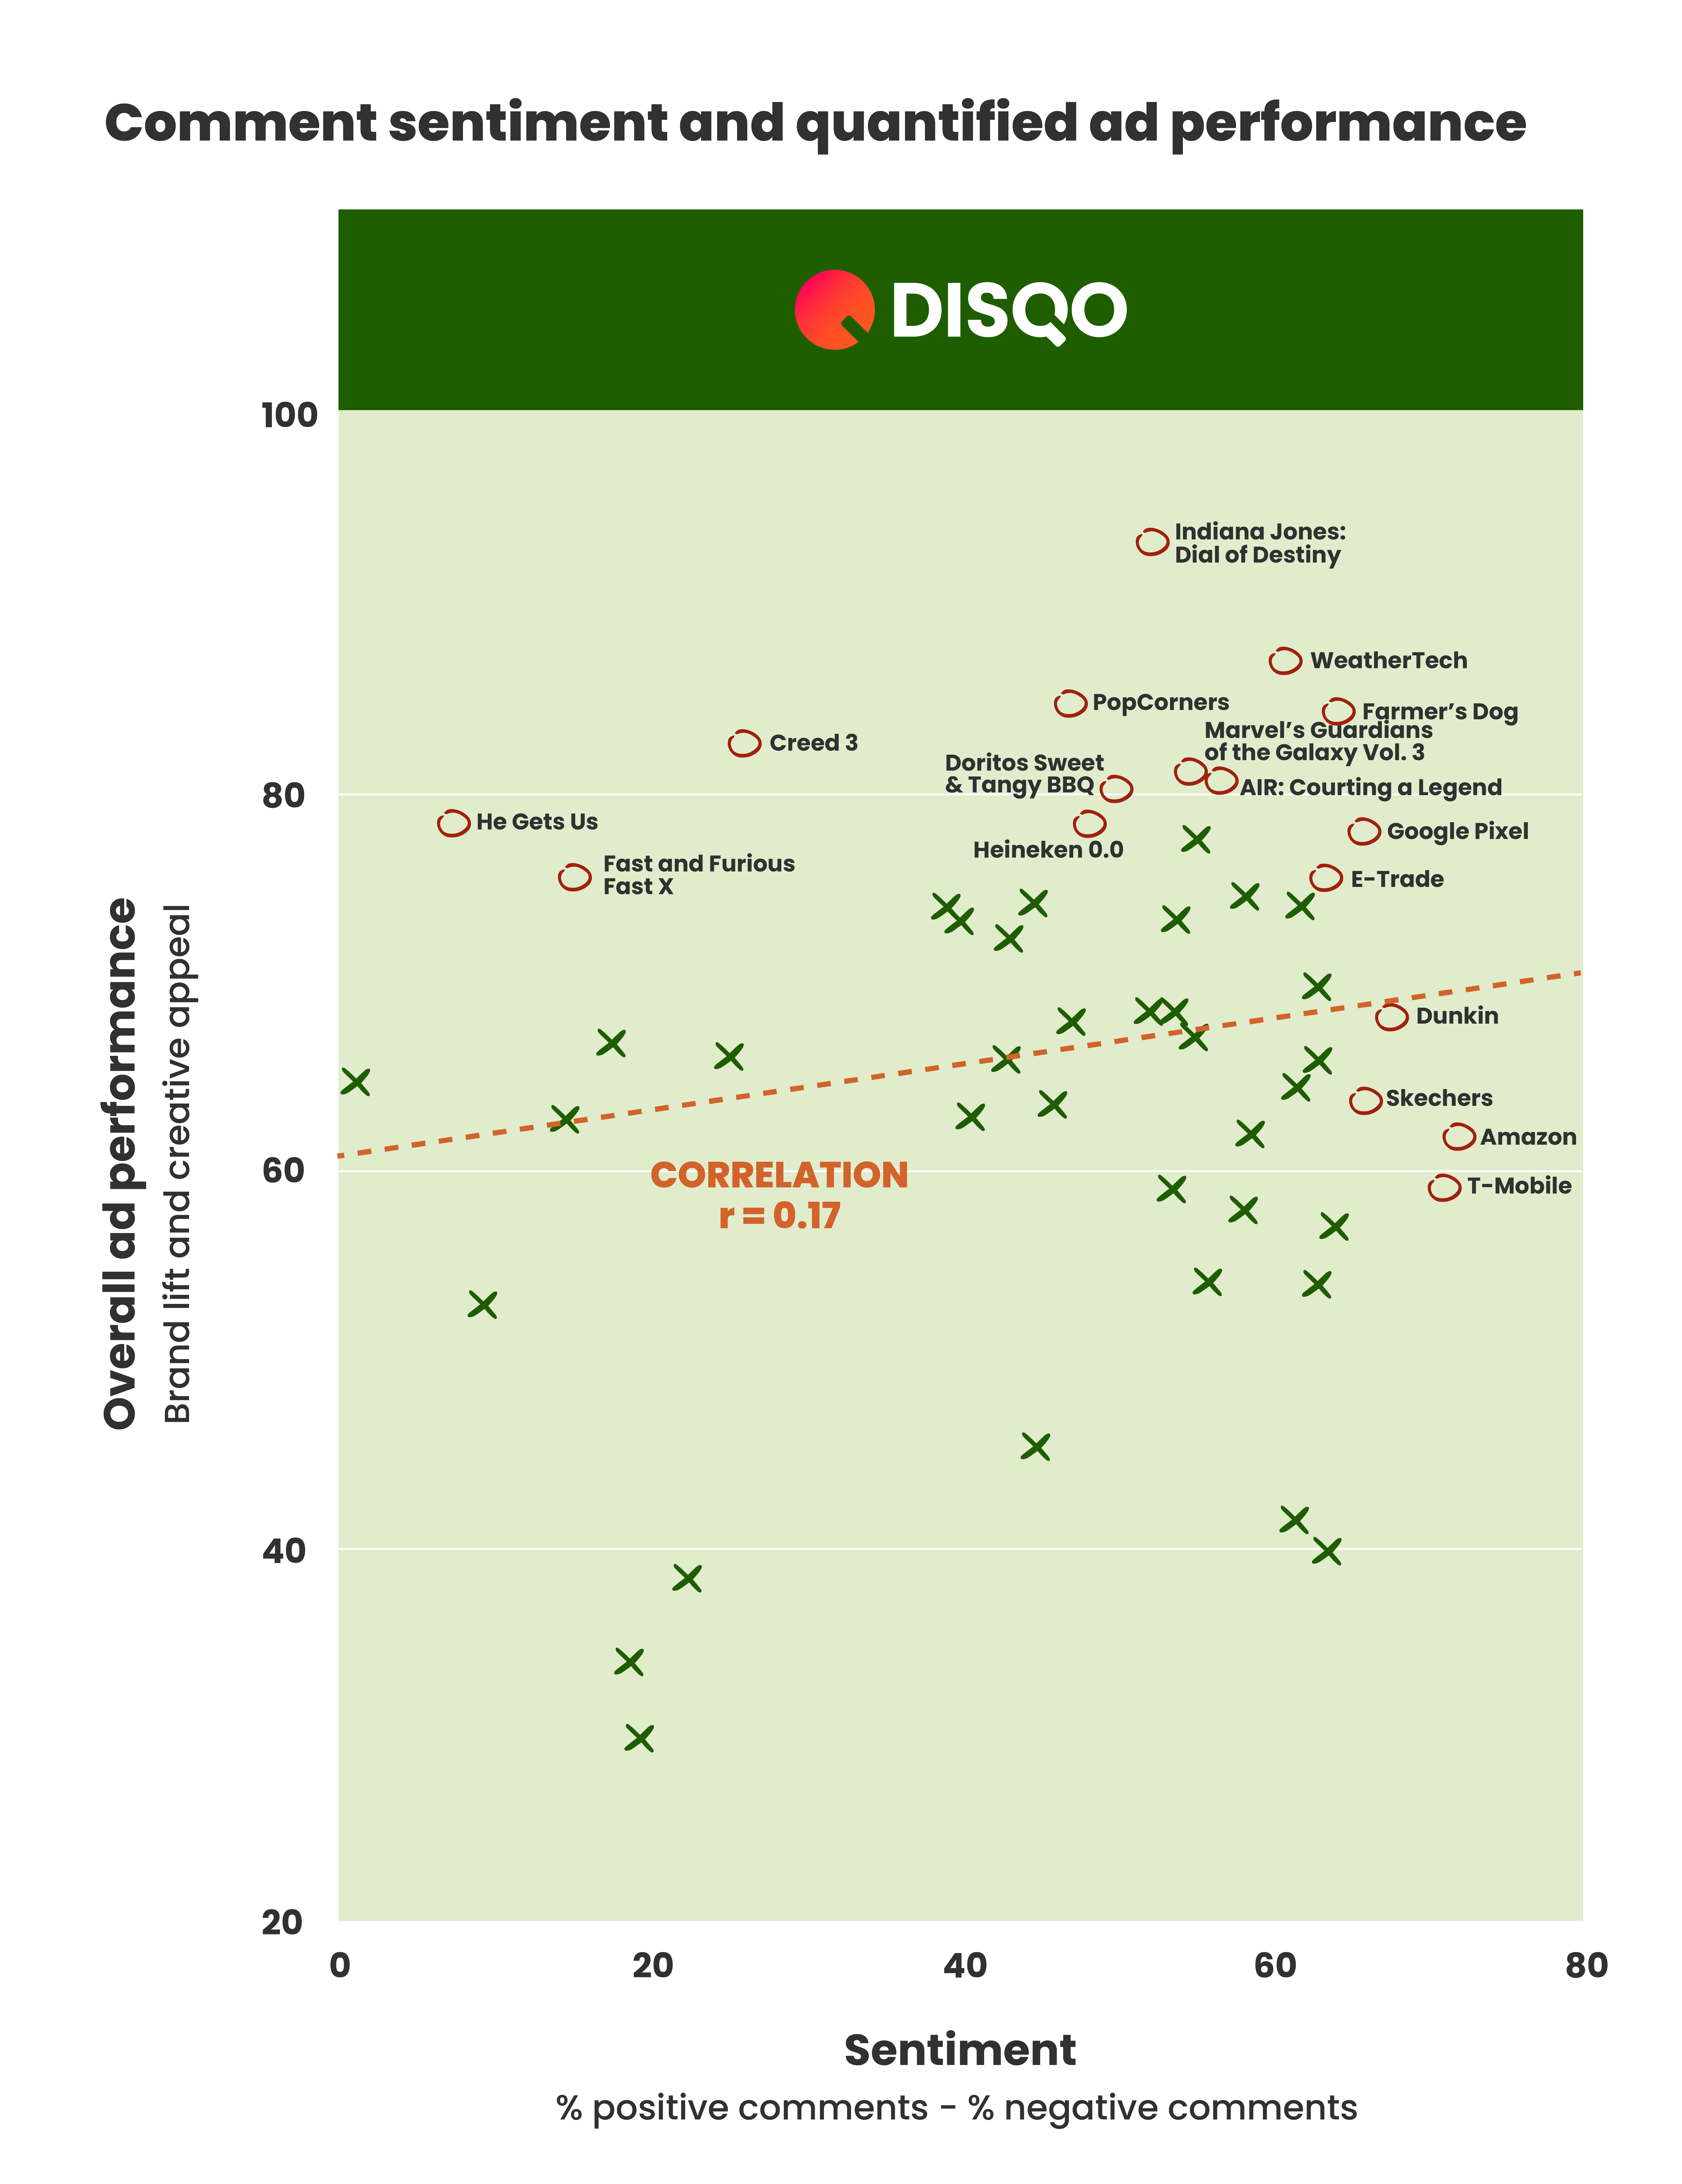 image of big game sentiment and quantified ad performance